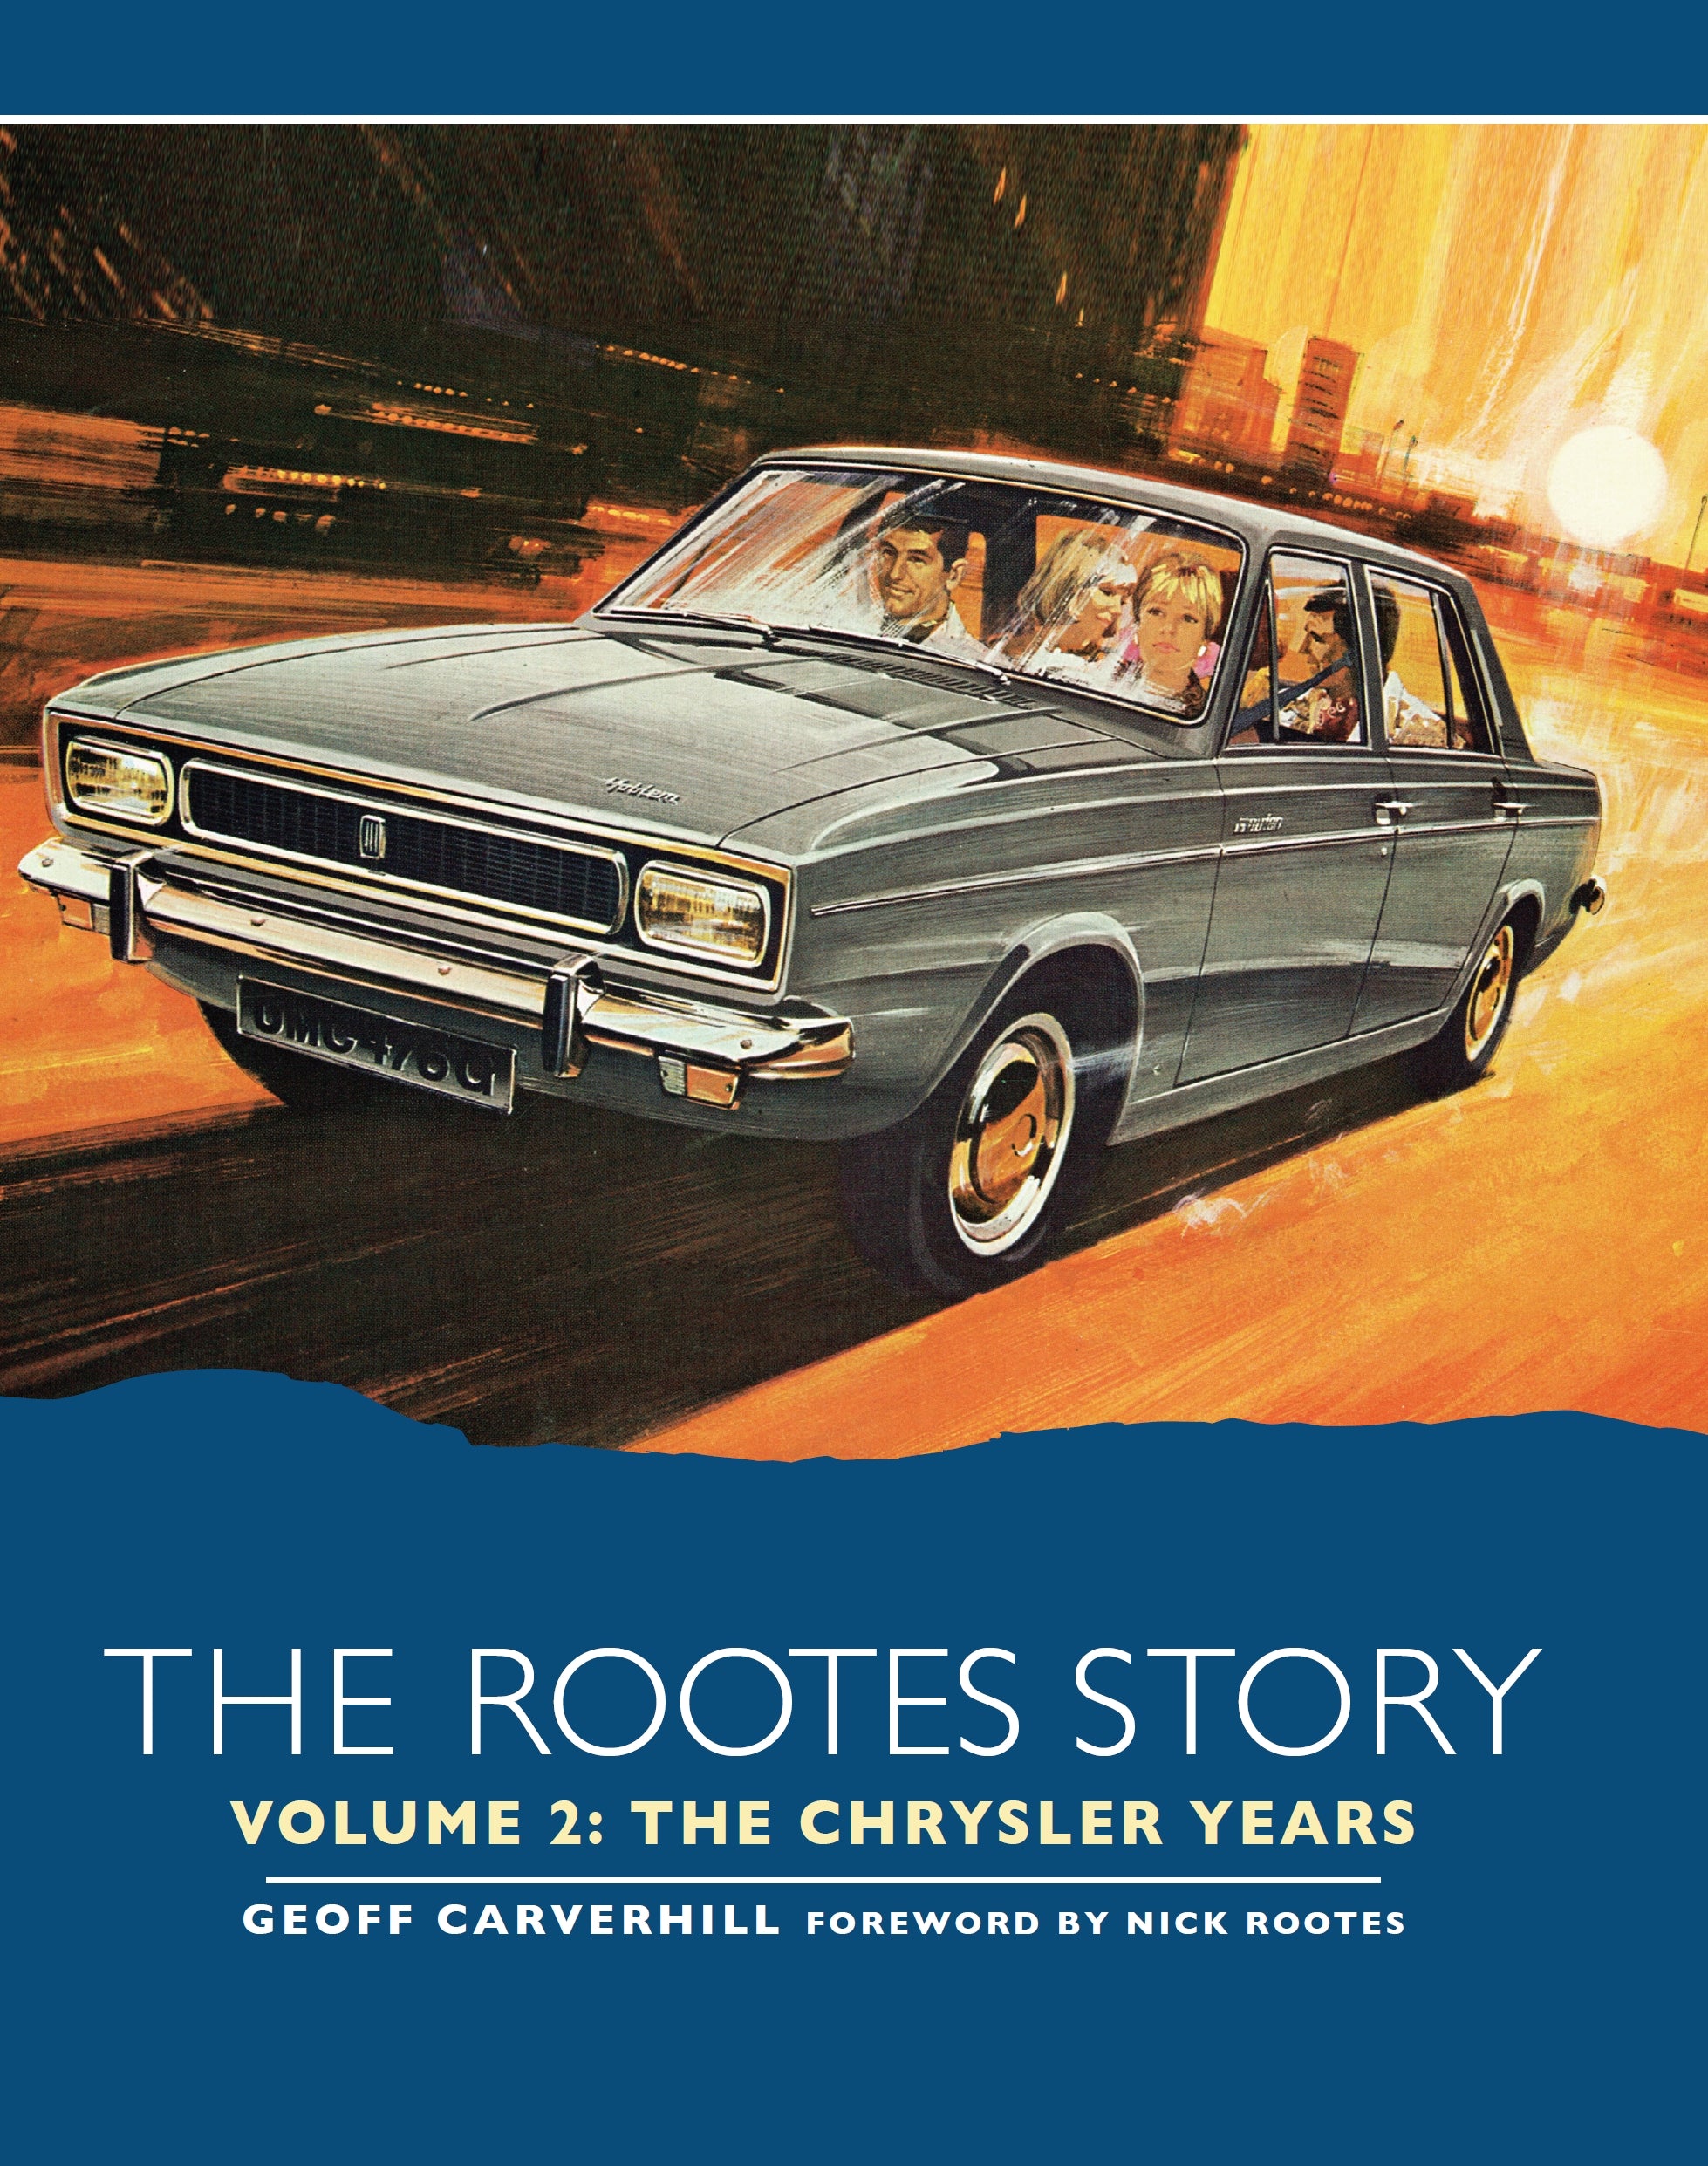 The Rootes Story Vol. II - The Chrysler Years